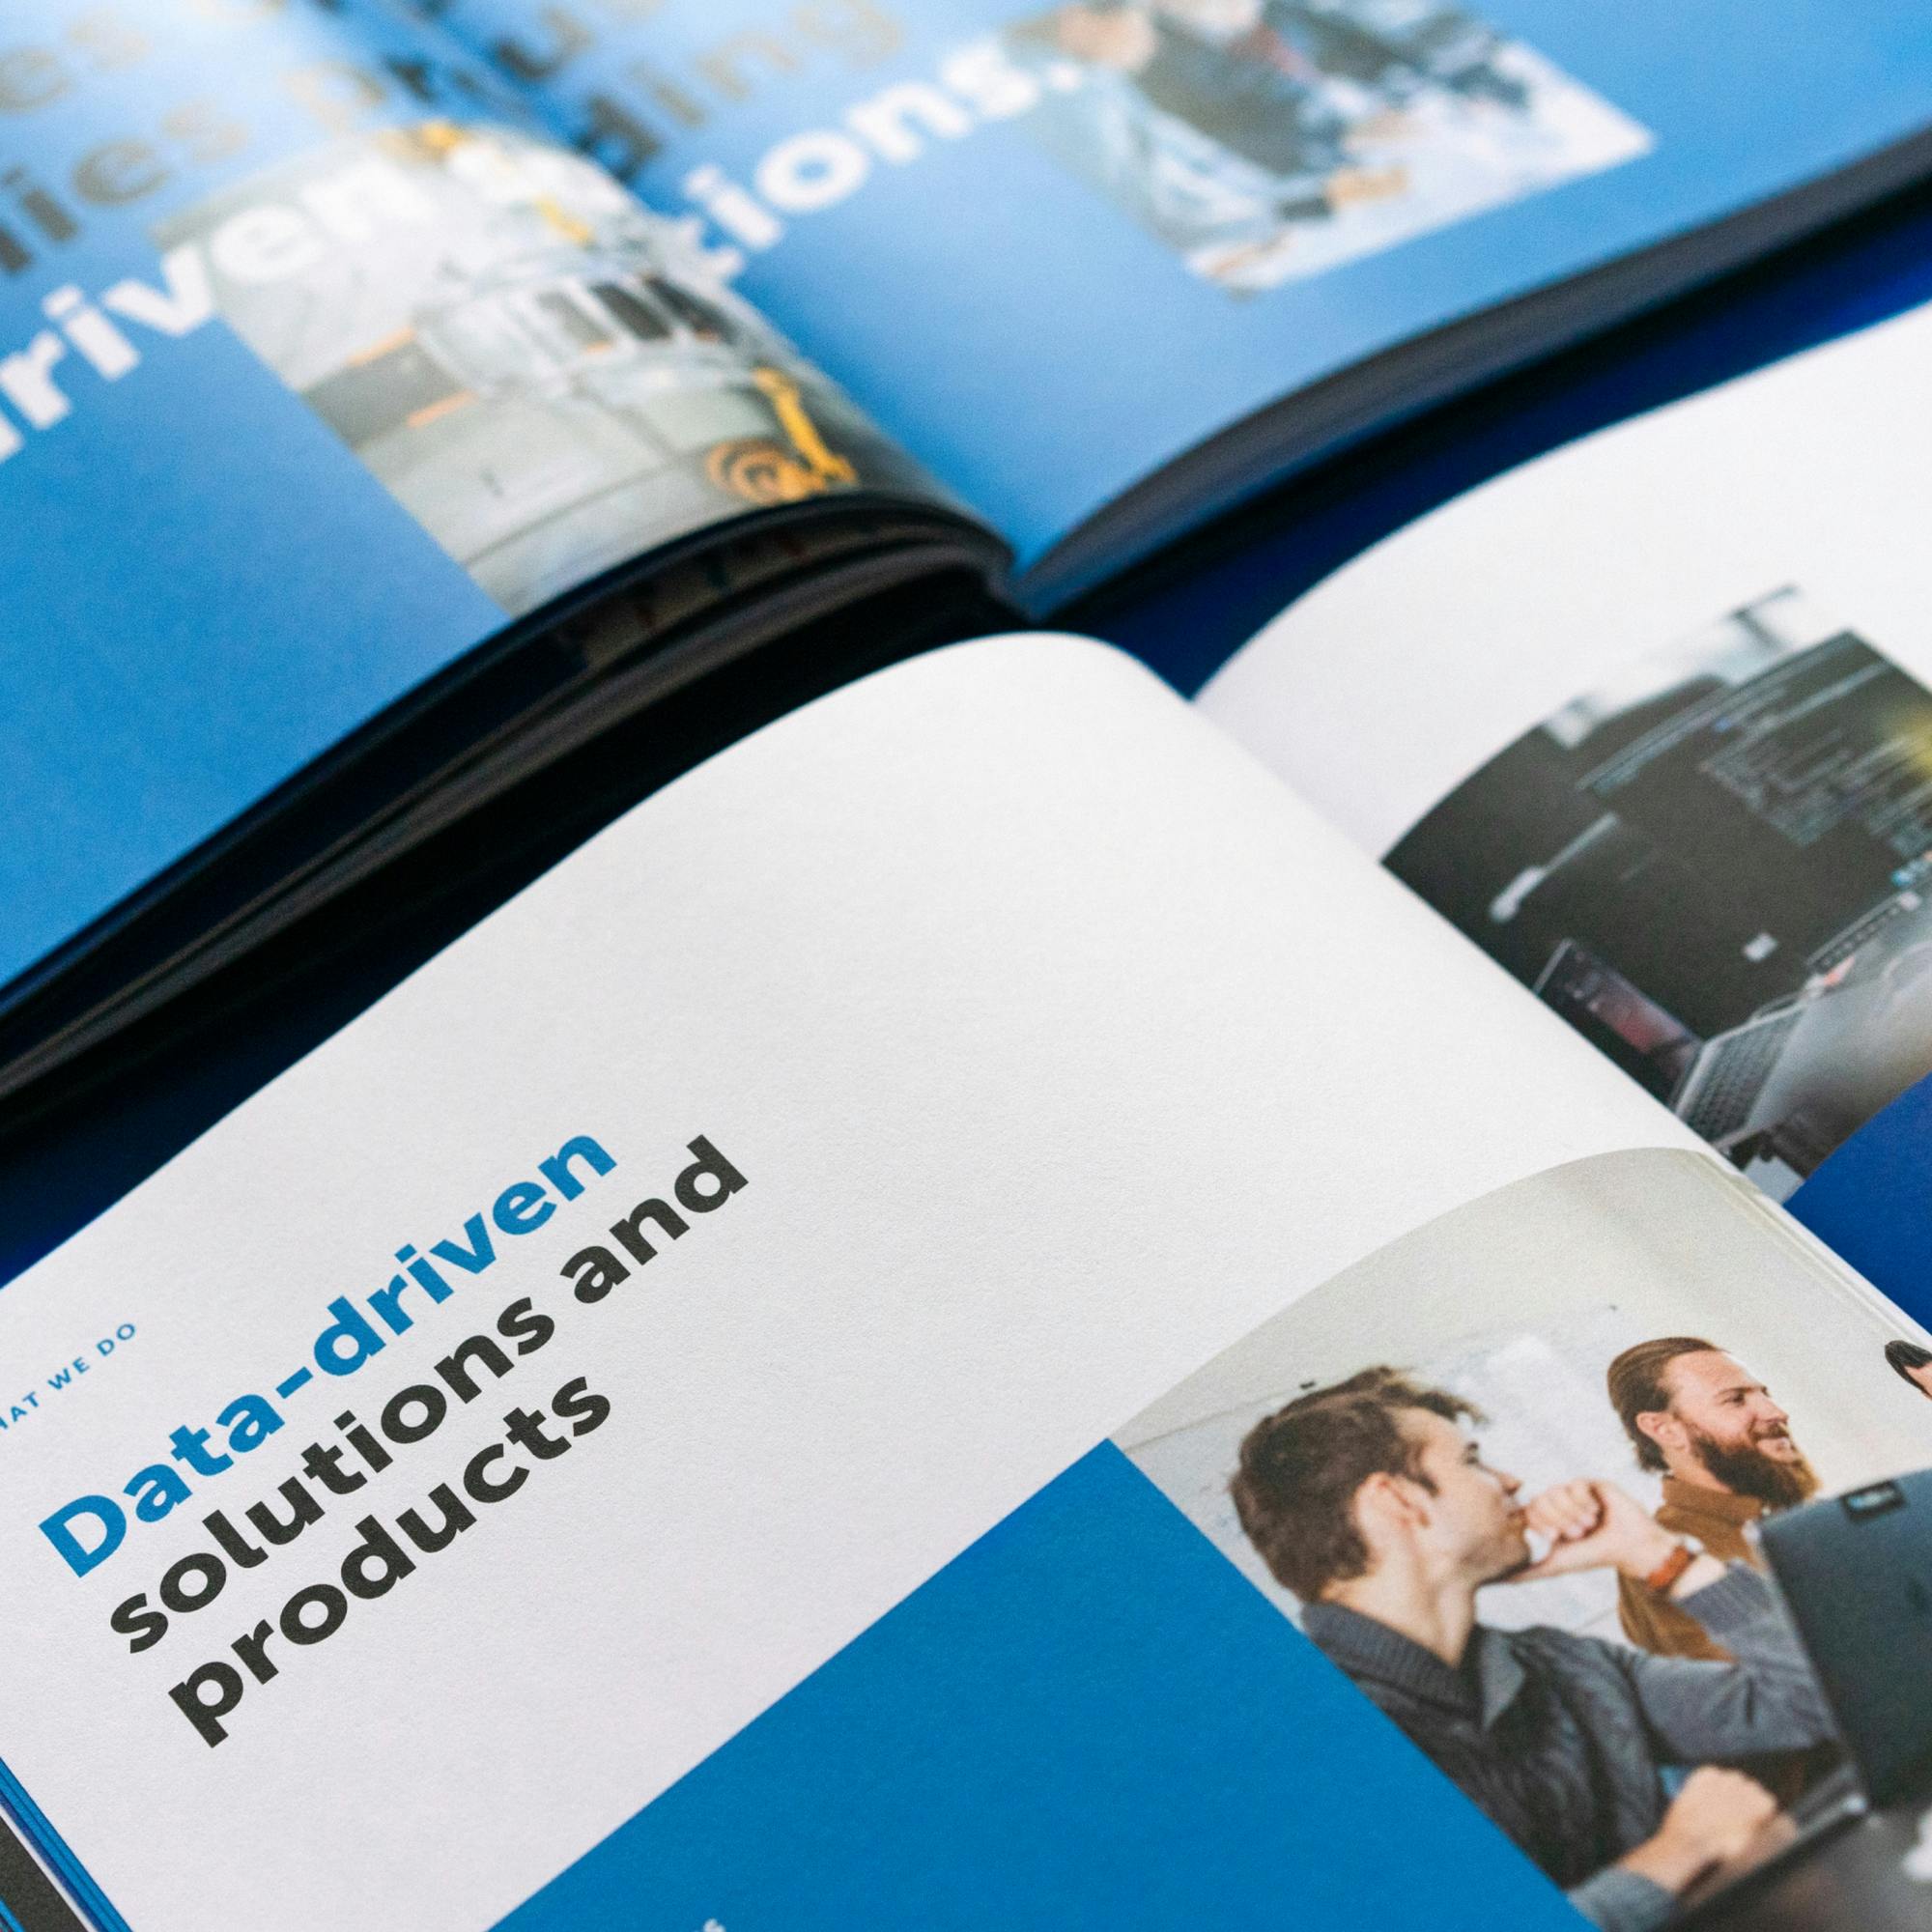 Detailaufnahme der Headline: Data-driven solutions and products © goodmatters